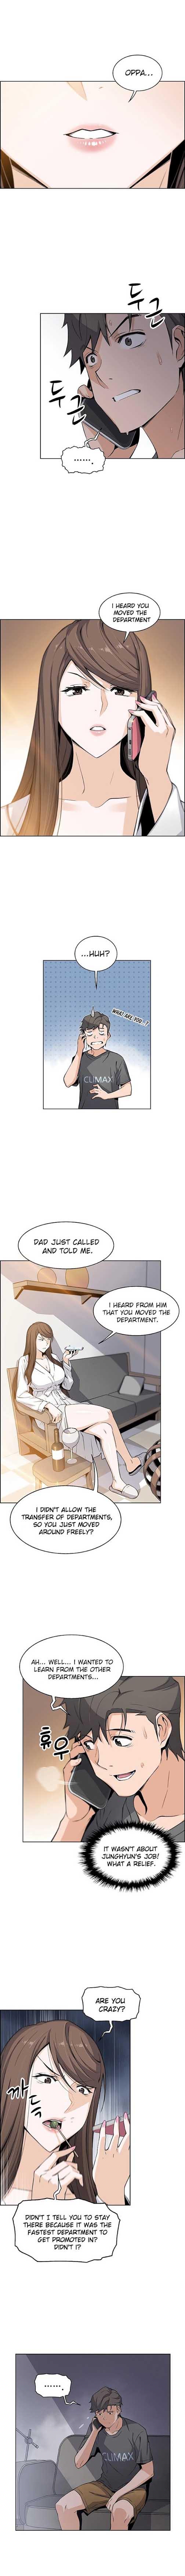 Housekeeper [Neck Pillow, Paper] Ch.49/49 [English] [Manhwa PDF] Completed 259